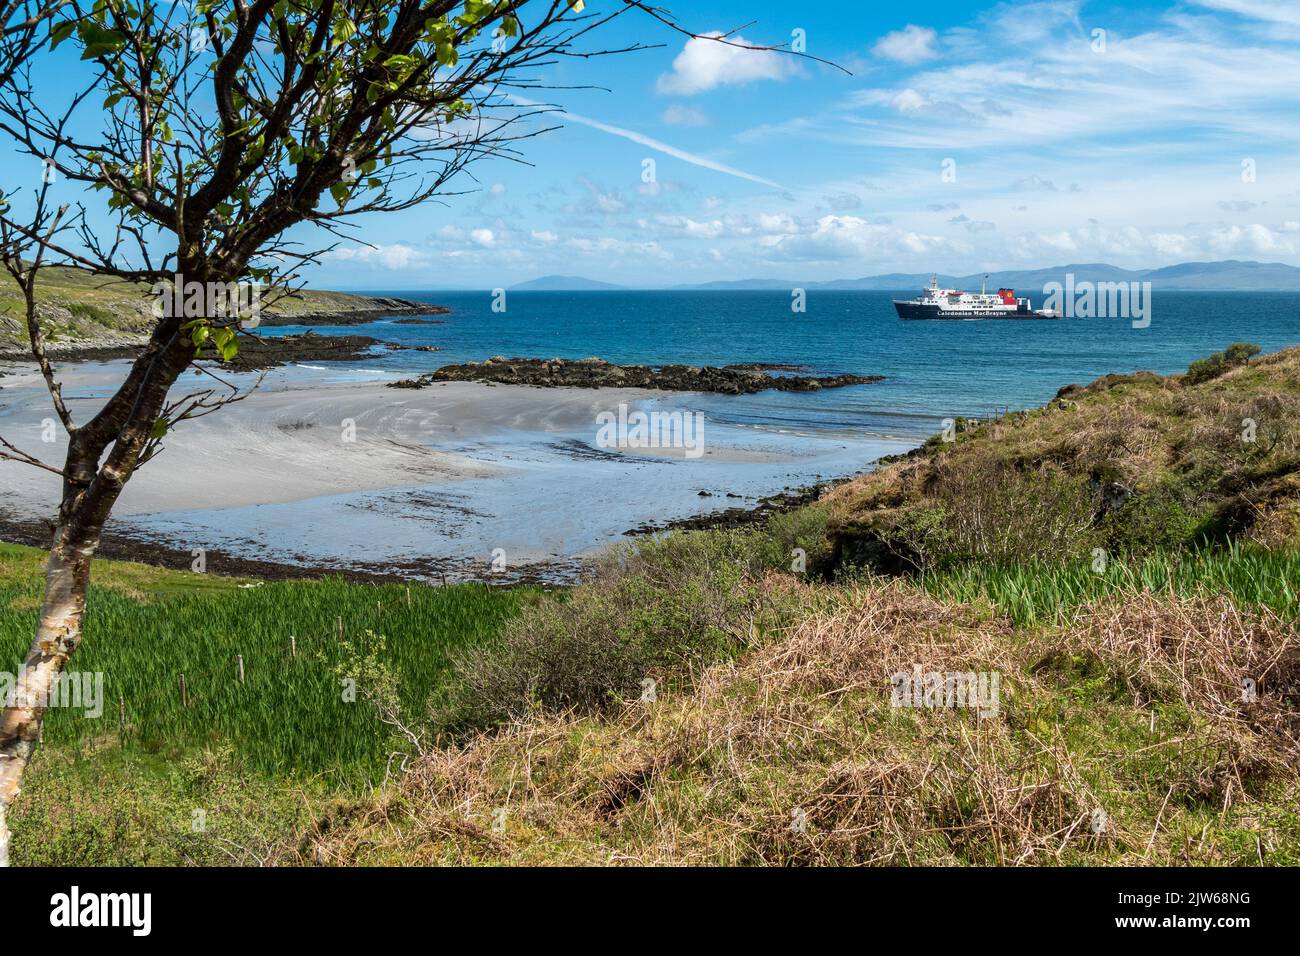 The Caledonian MacBrayne Ferry 'Hebridean Isles' approaches the Isle of Colonsay en-route from Islay, with sandy Queen's Bay beach in the foreground. Stock Photo